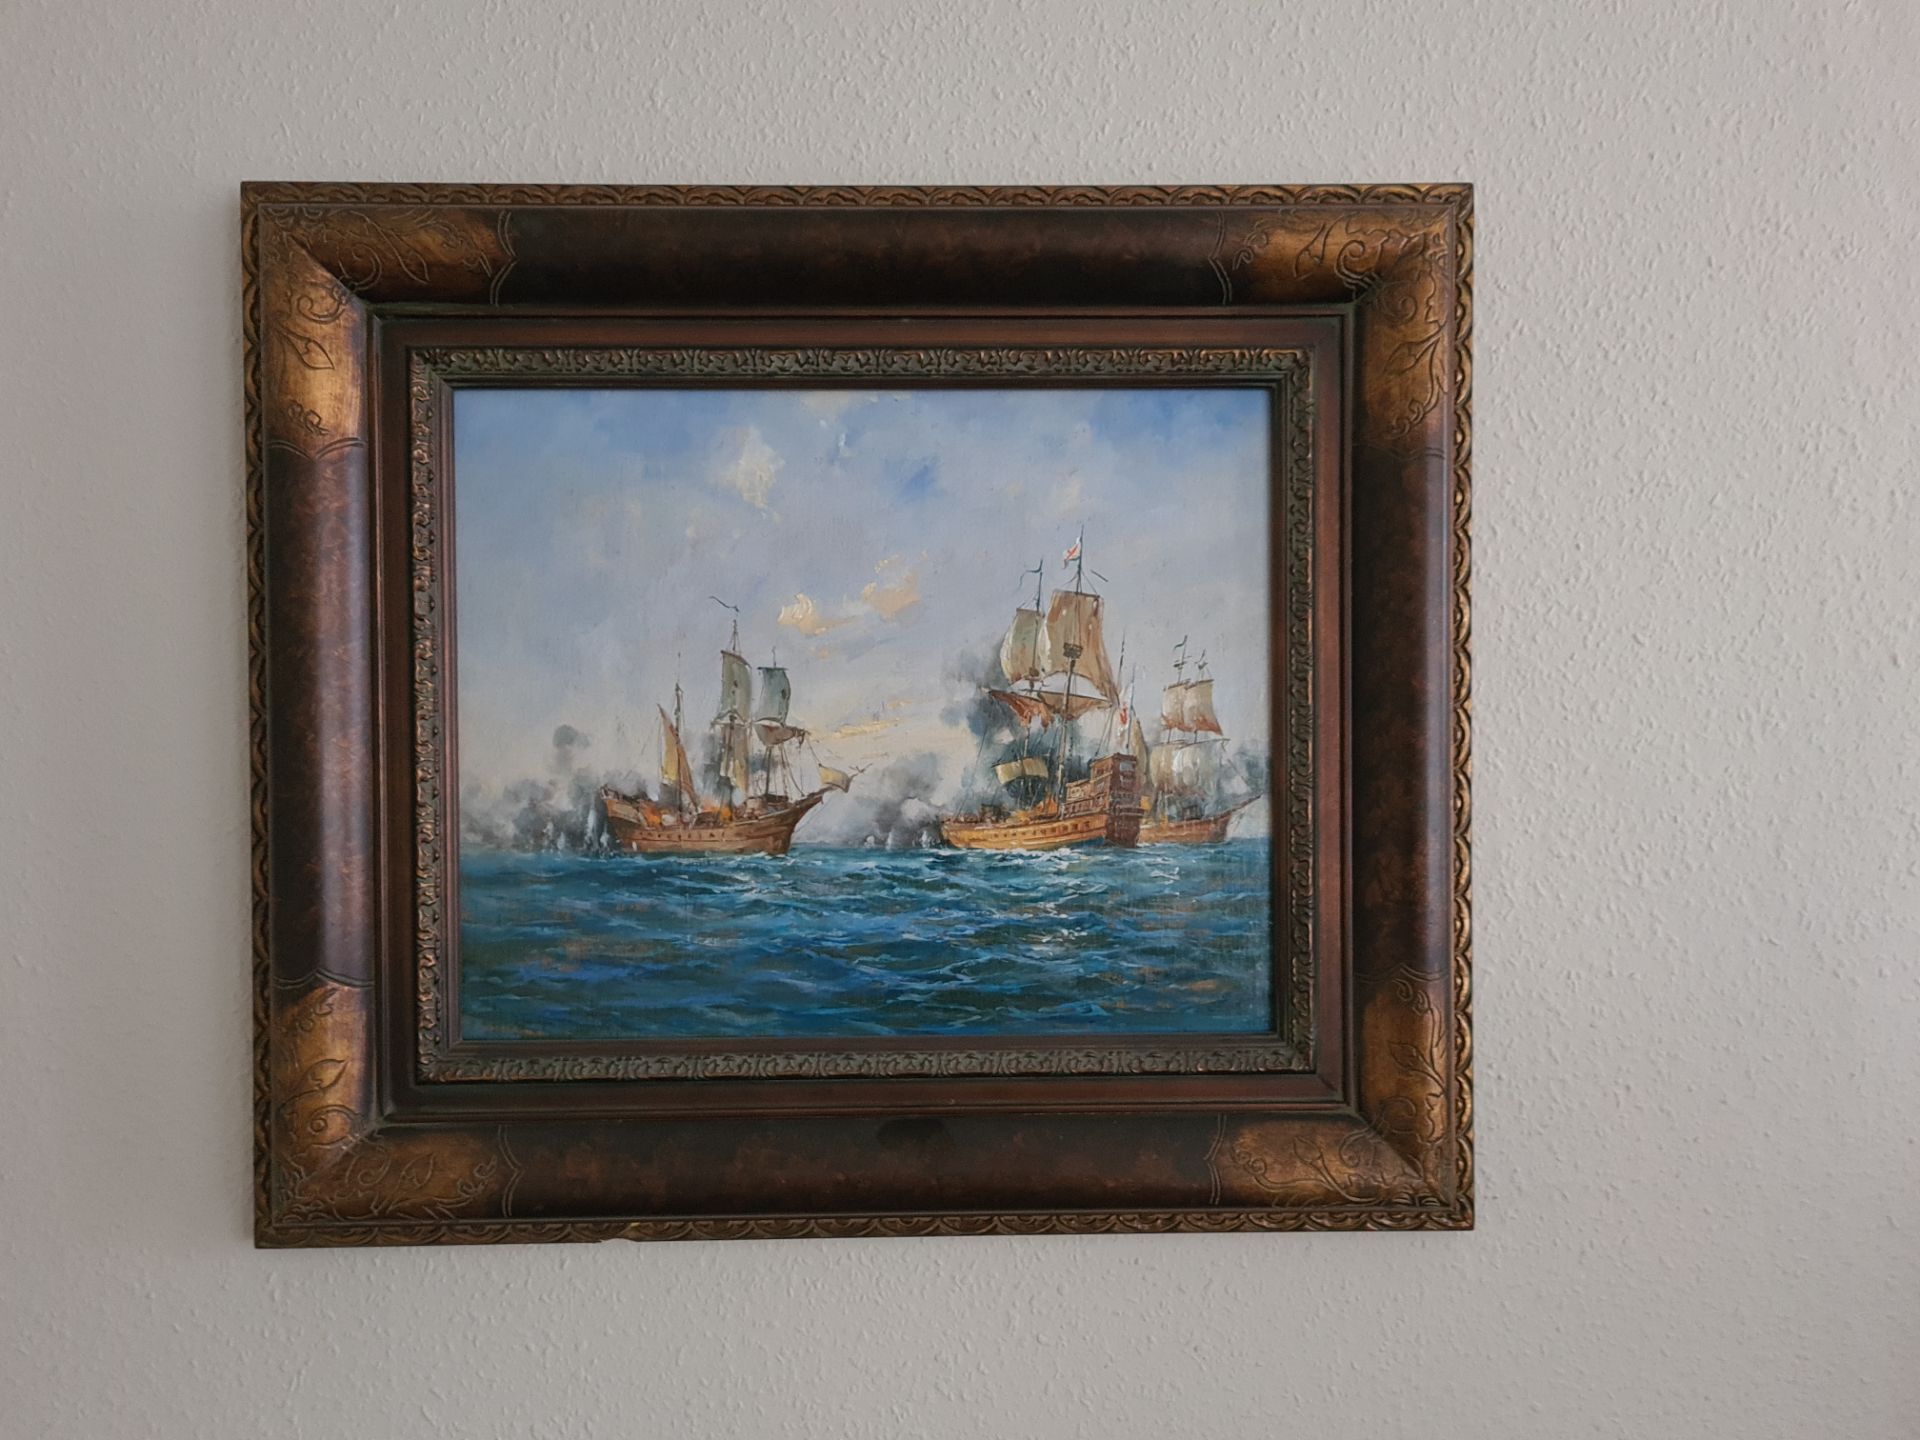 Signed and Framed Original Oil on Canvas Painting of Sea Battle by A Webb, 64cm x 74cm